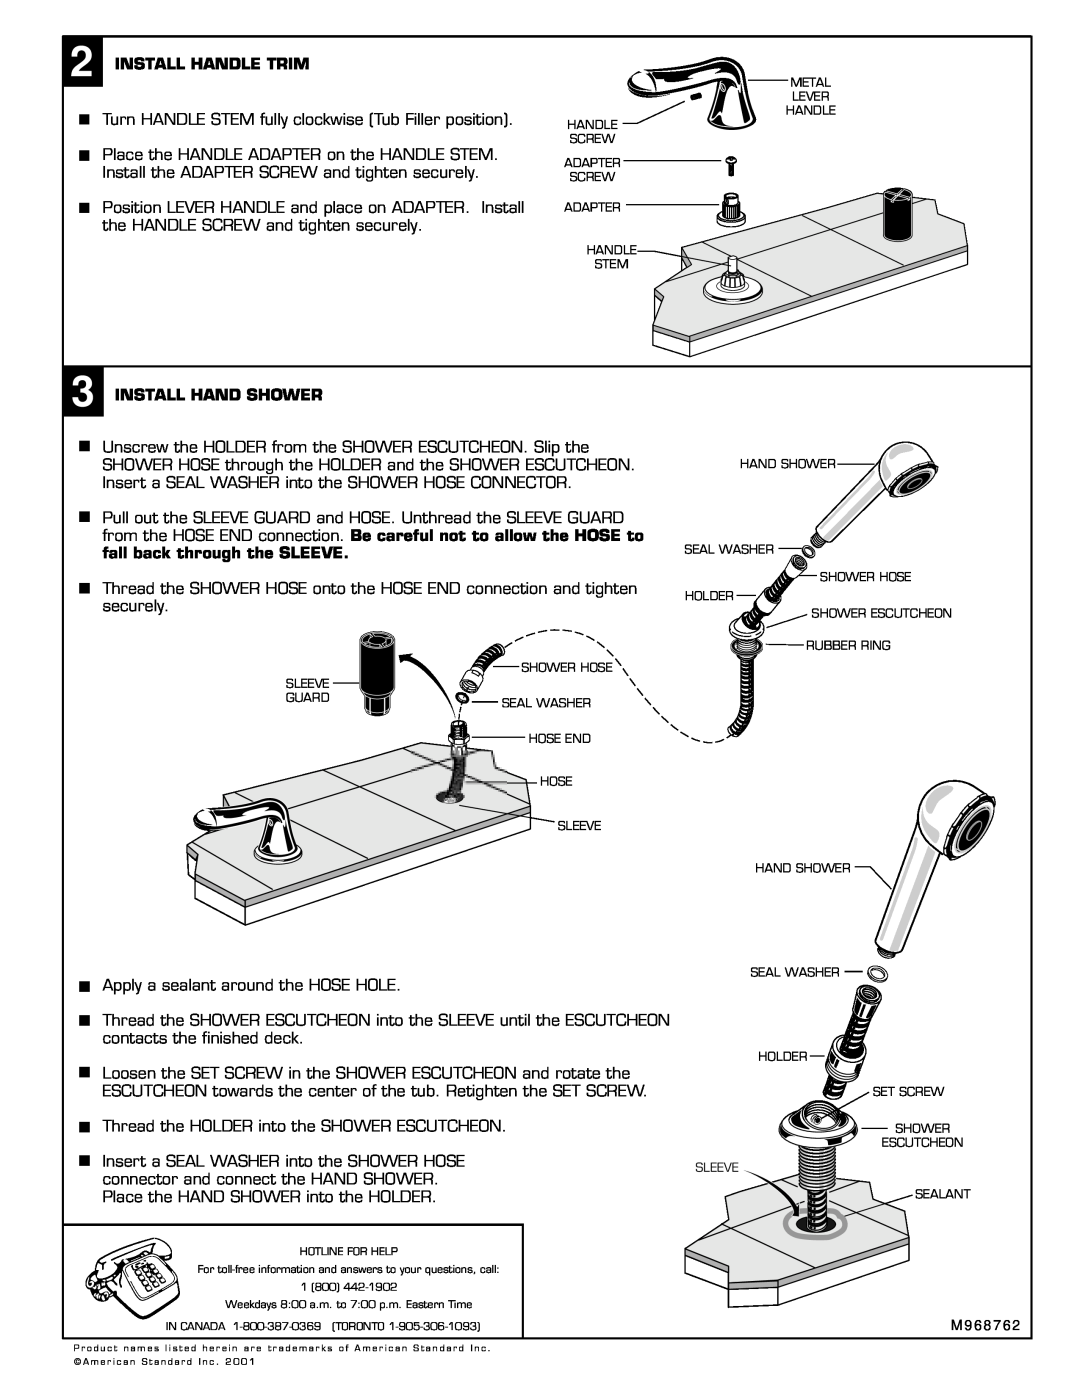 American Standard T990.5XX installation instructions Install Handle Trim, fall back through the SLEEVE 